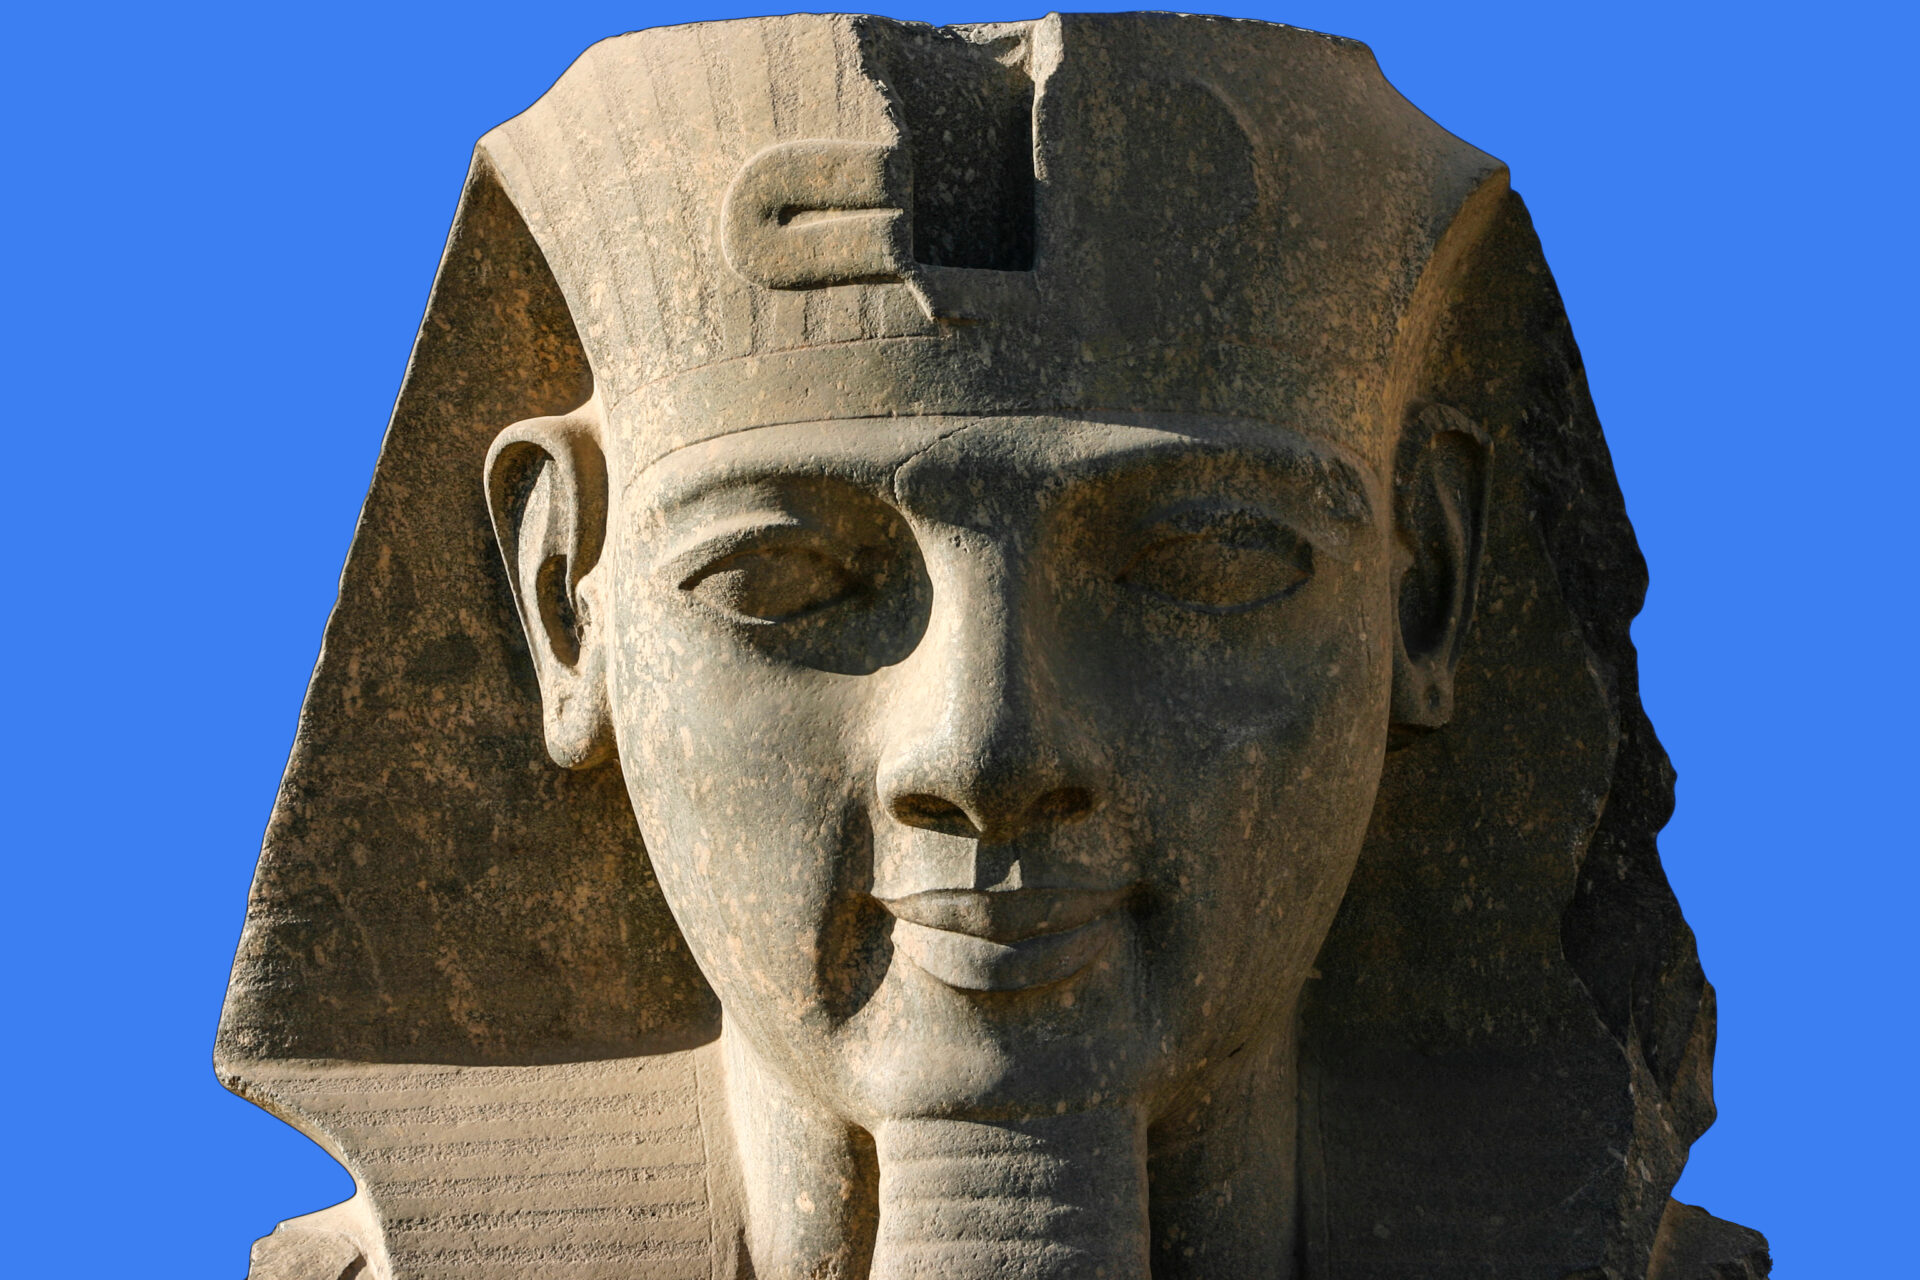 Statue of Ramses II in Luxor temple, Egypt.